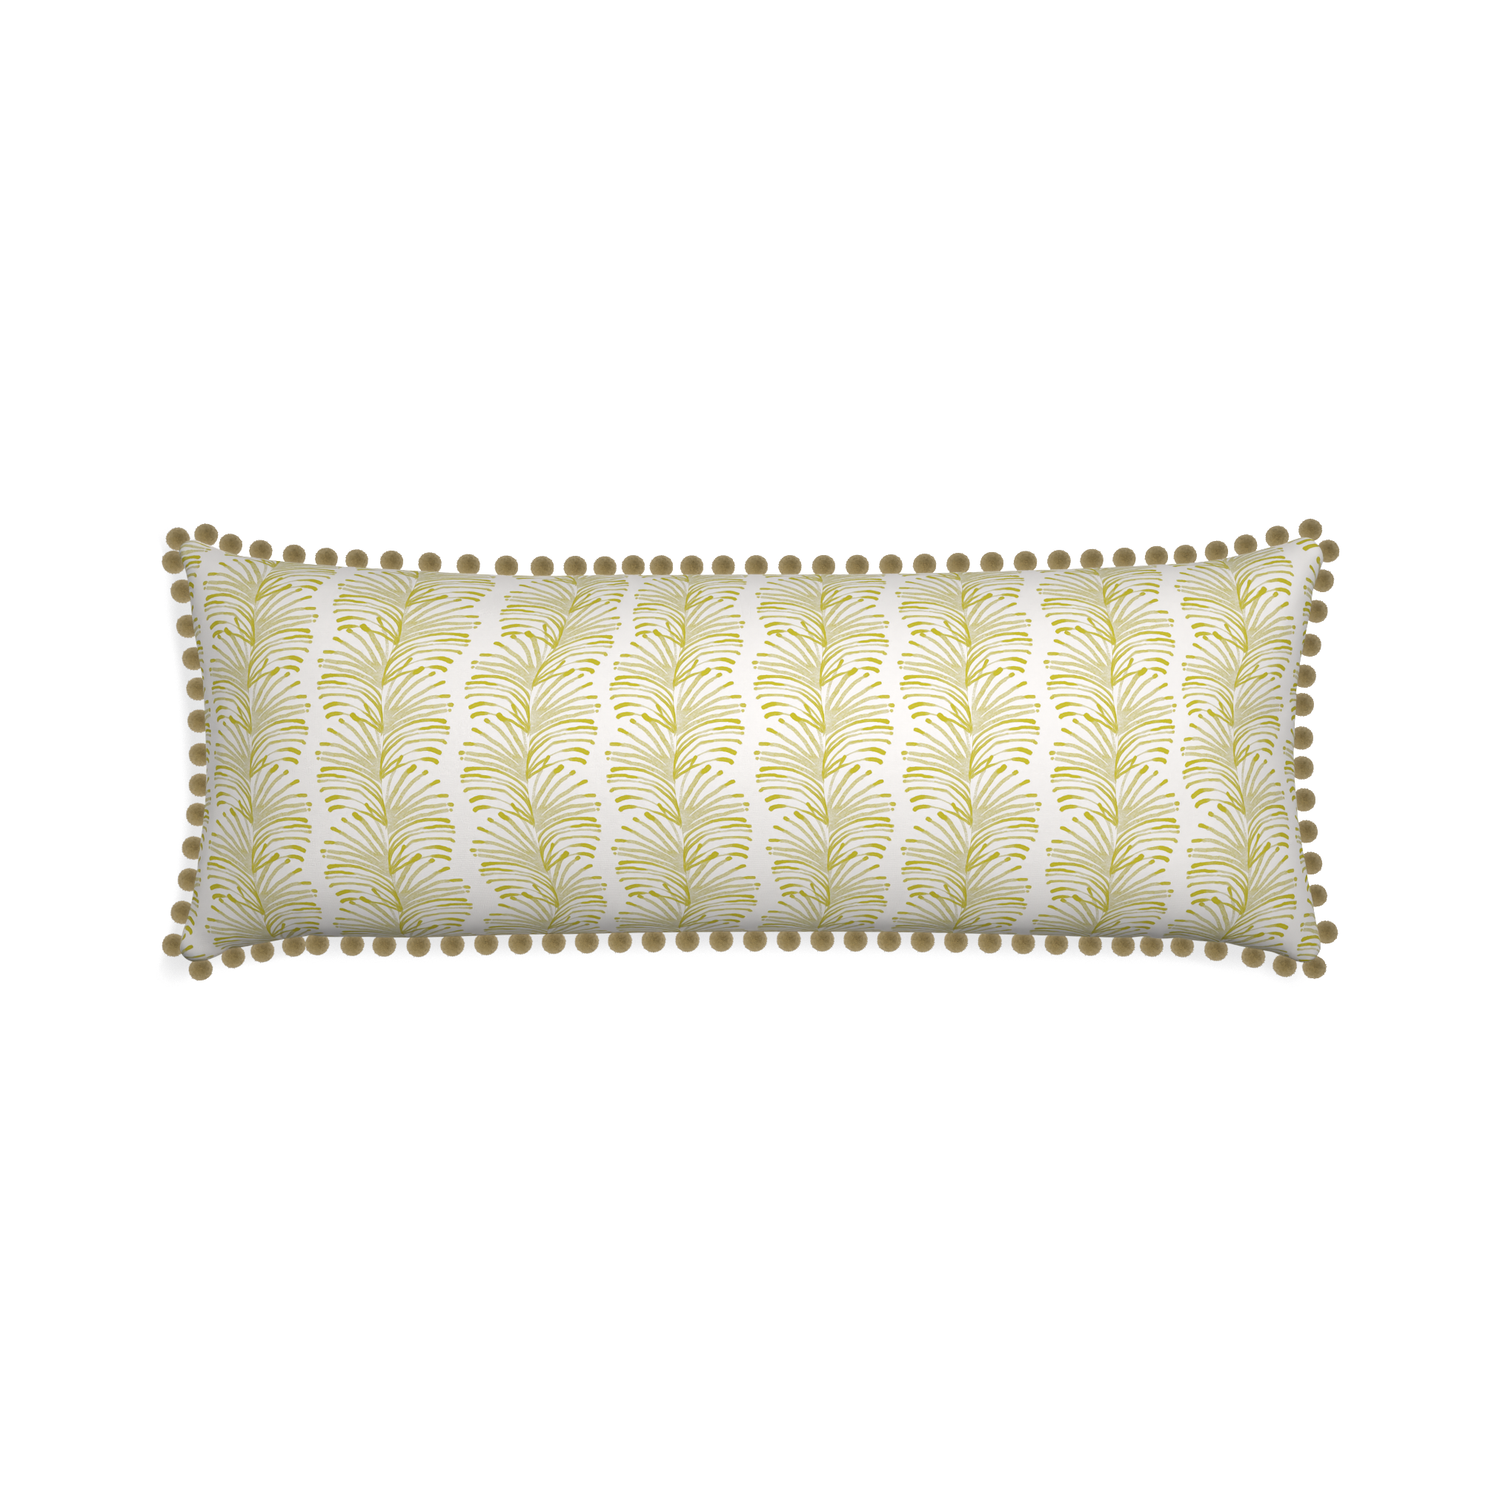 Xl-lumbar emma chartreuse custom yellow stripe chartreusepillow with olive pom pom on white background